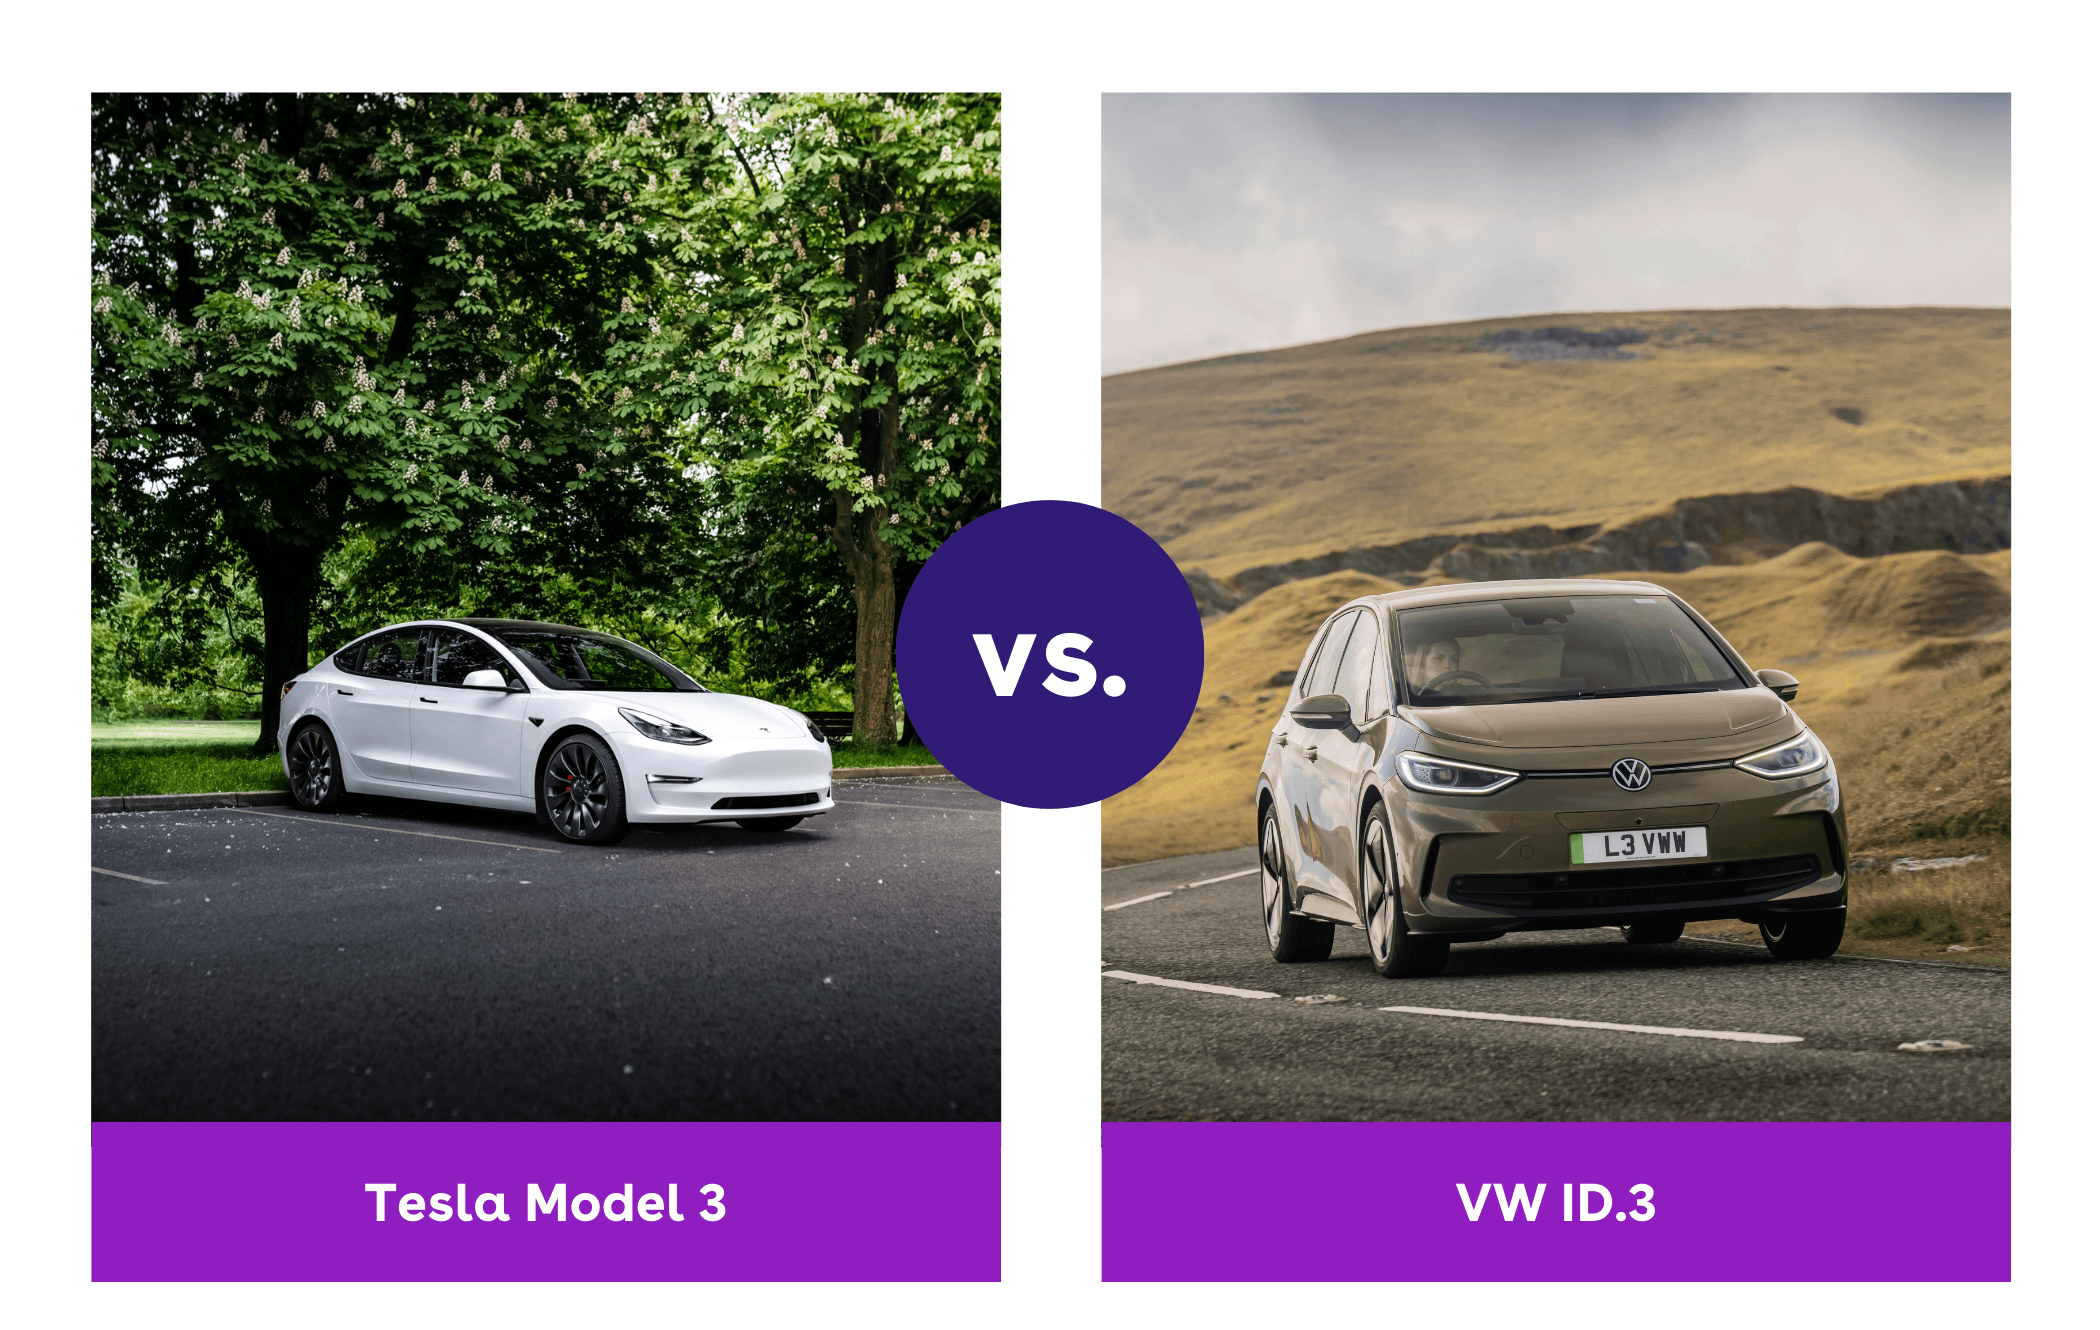 on the left is a white tesla model 3 parked under a tree and on the right is a green vw id.3 driving on a country road